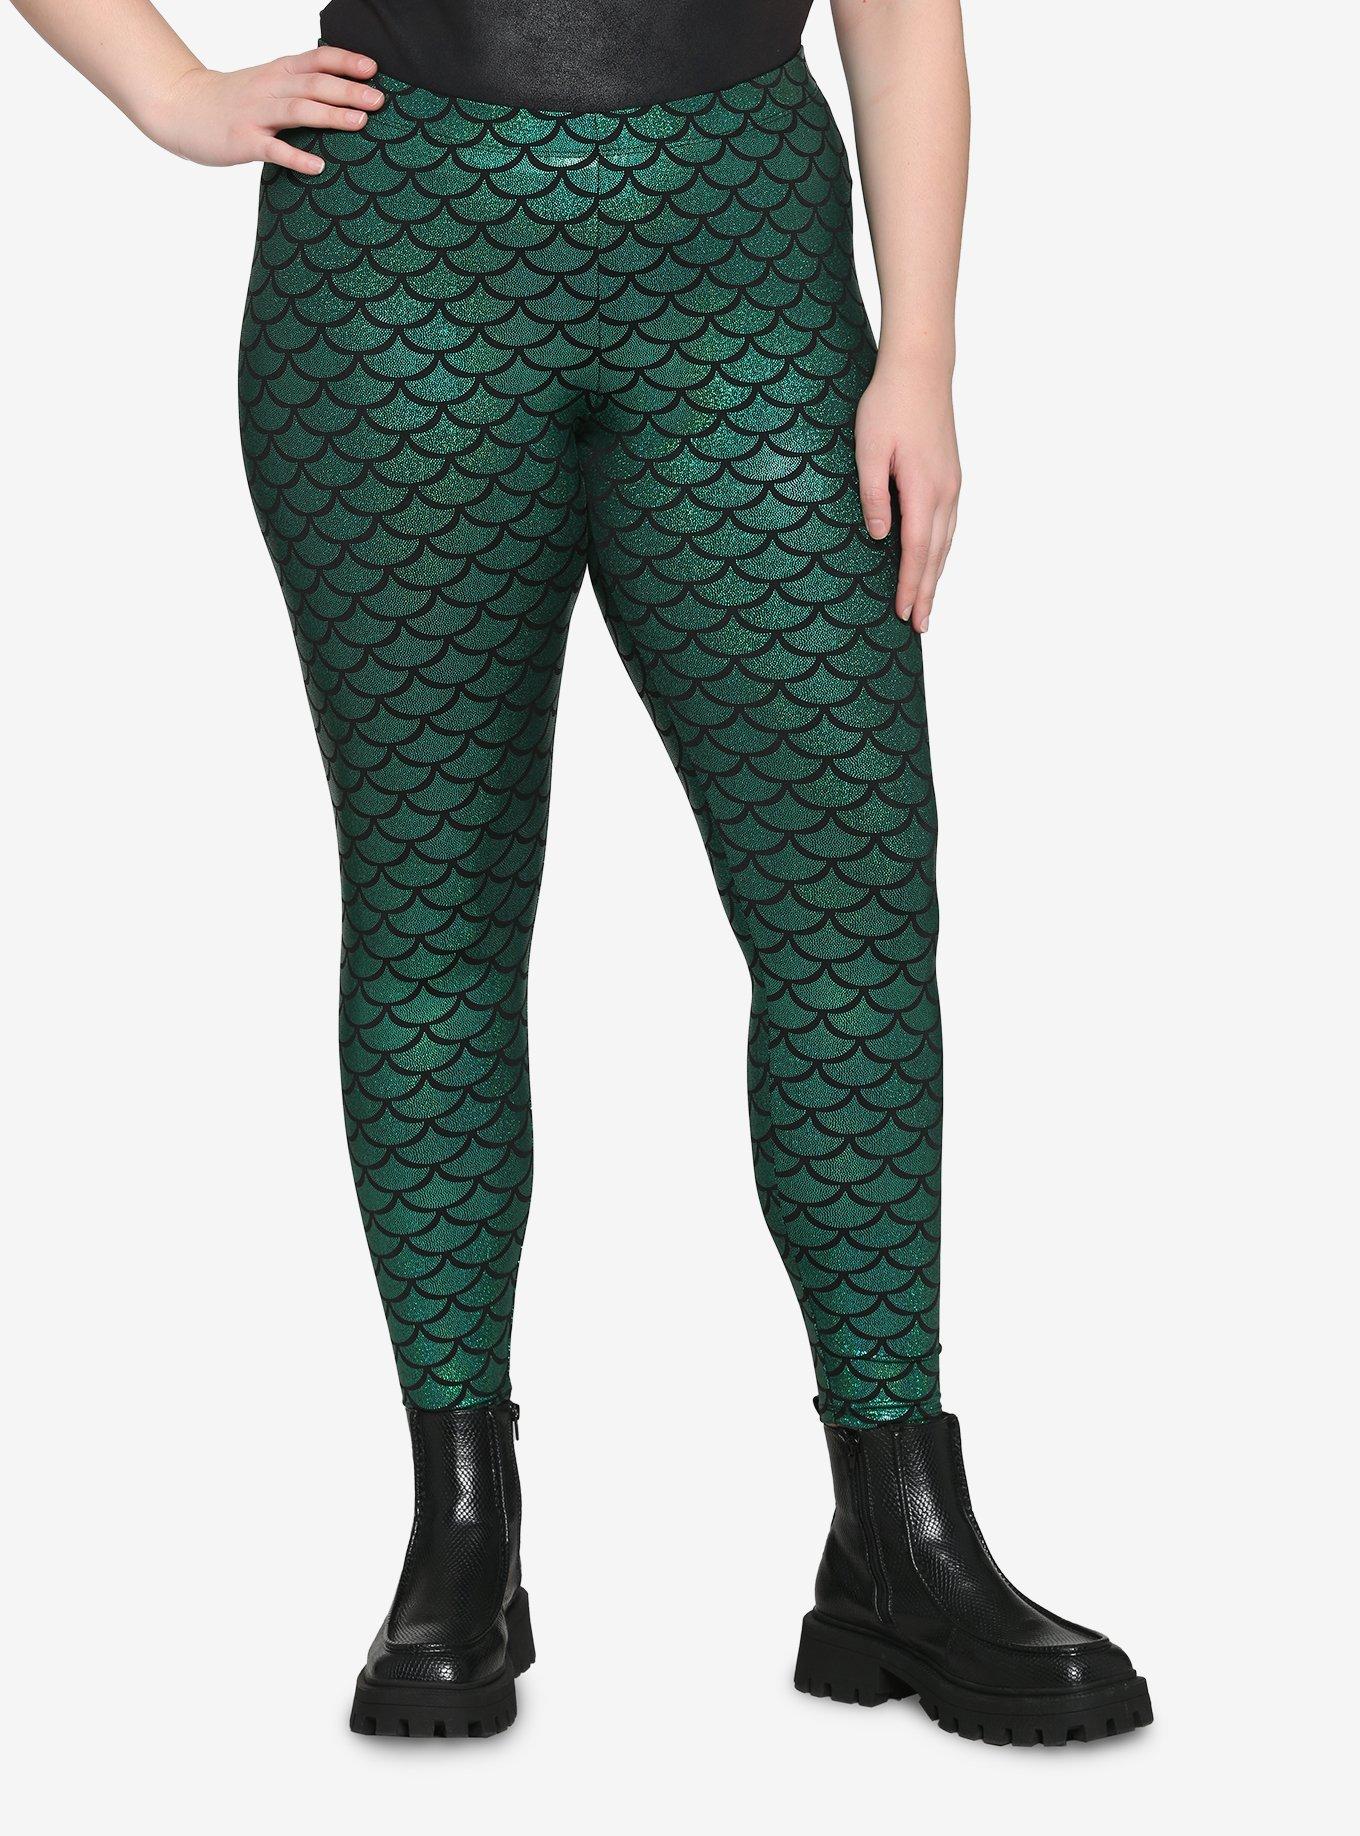 Plus Size Mermaid Leggings Do Excist - You Just Have To Know Where